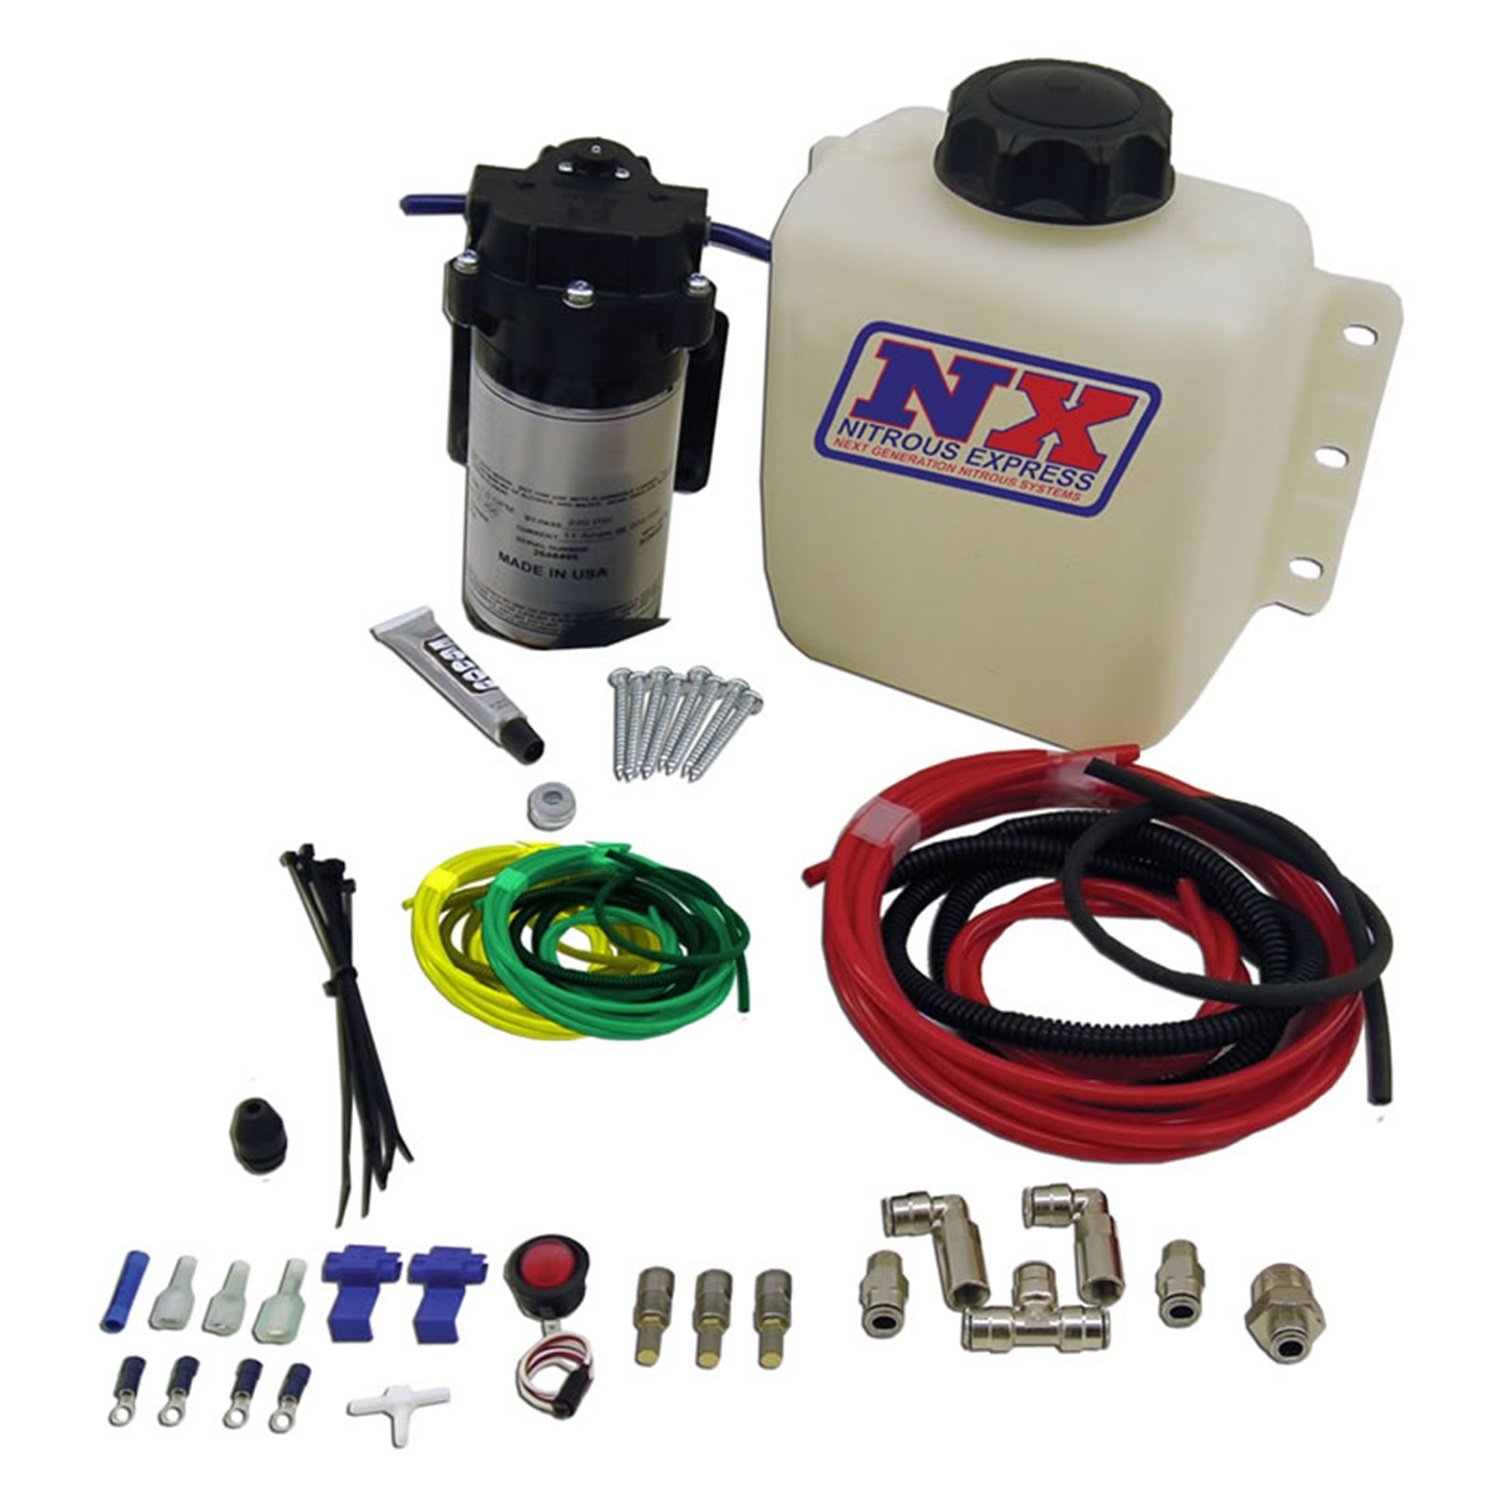 Nitrous Express Water/Methanol Injection System, Gas Stage 1 Boost Engine for Corvette, Camaro and others